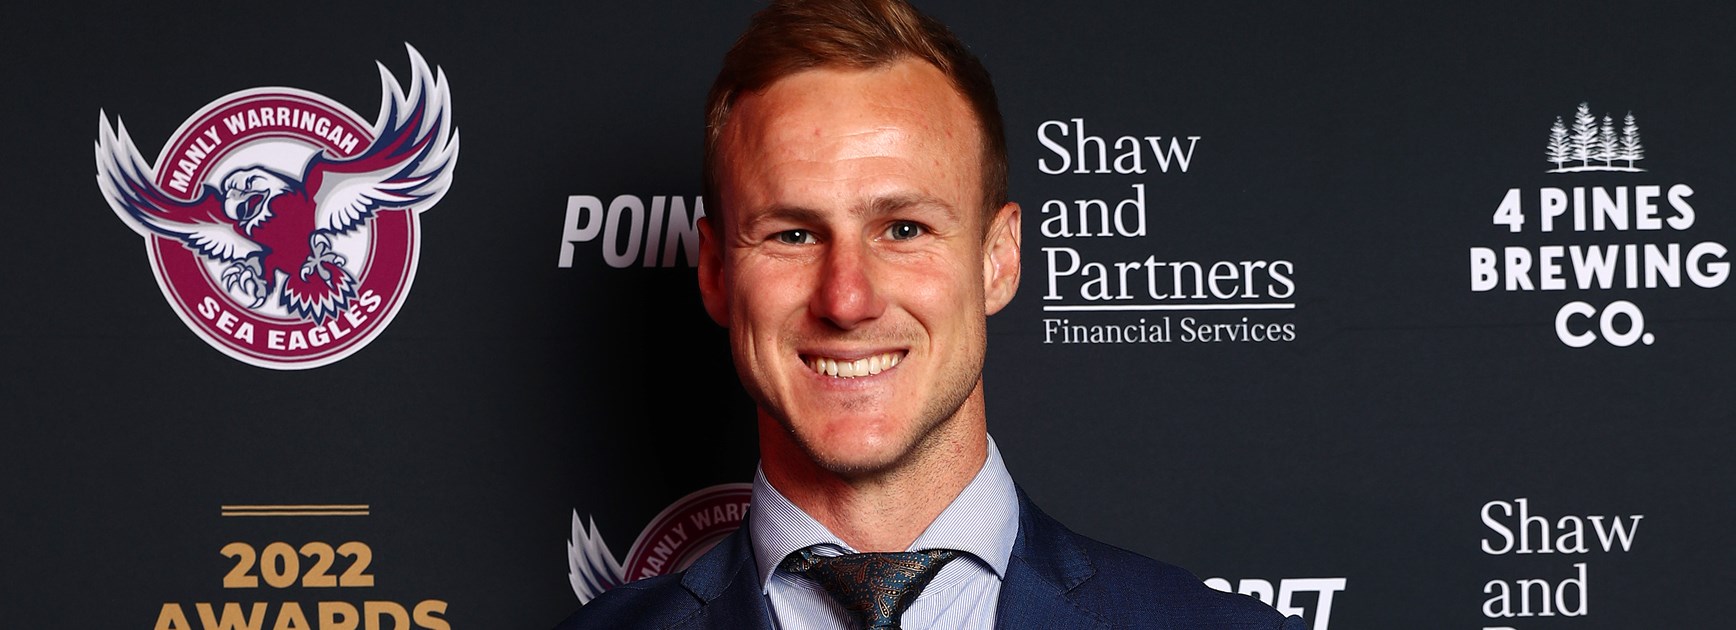 Members vote Daly Cherry-Evans as their 2022 champion